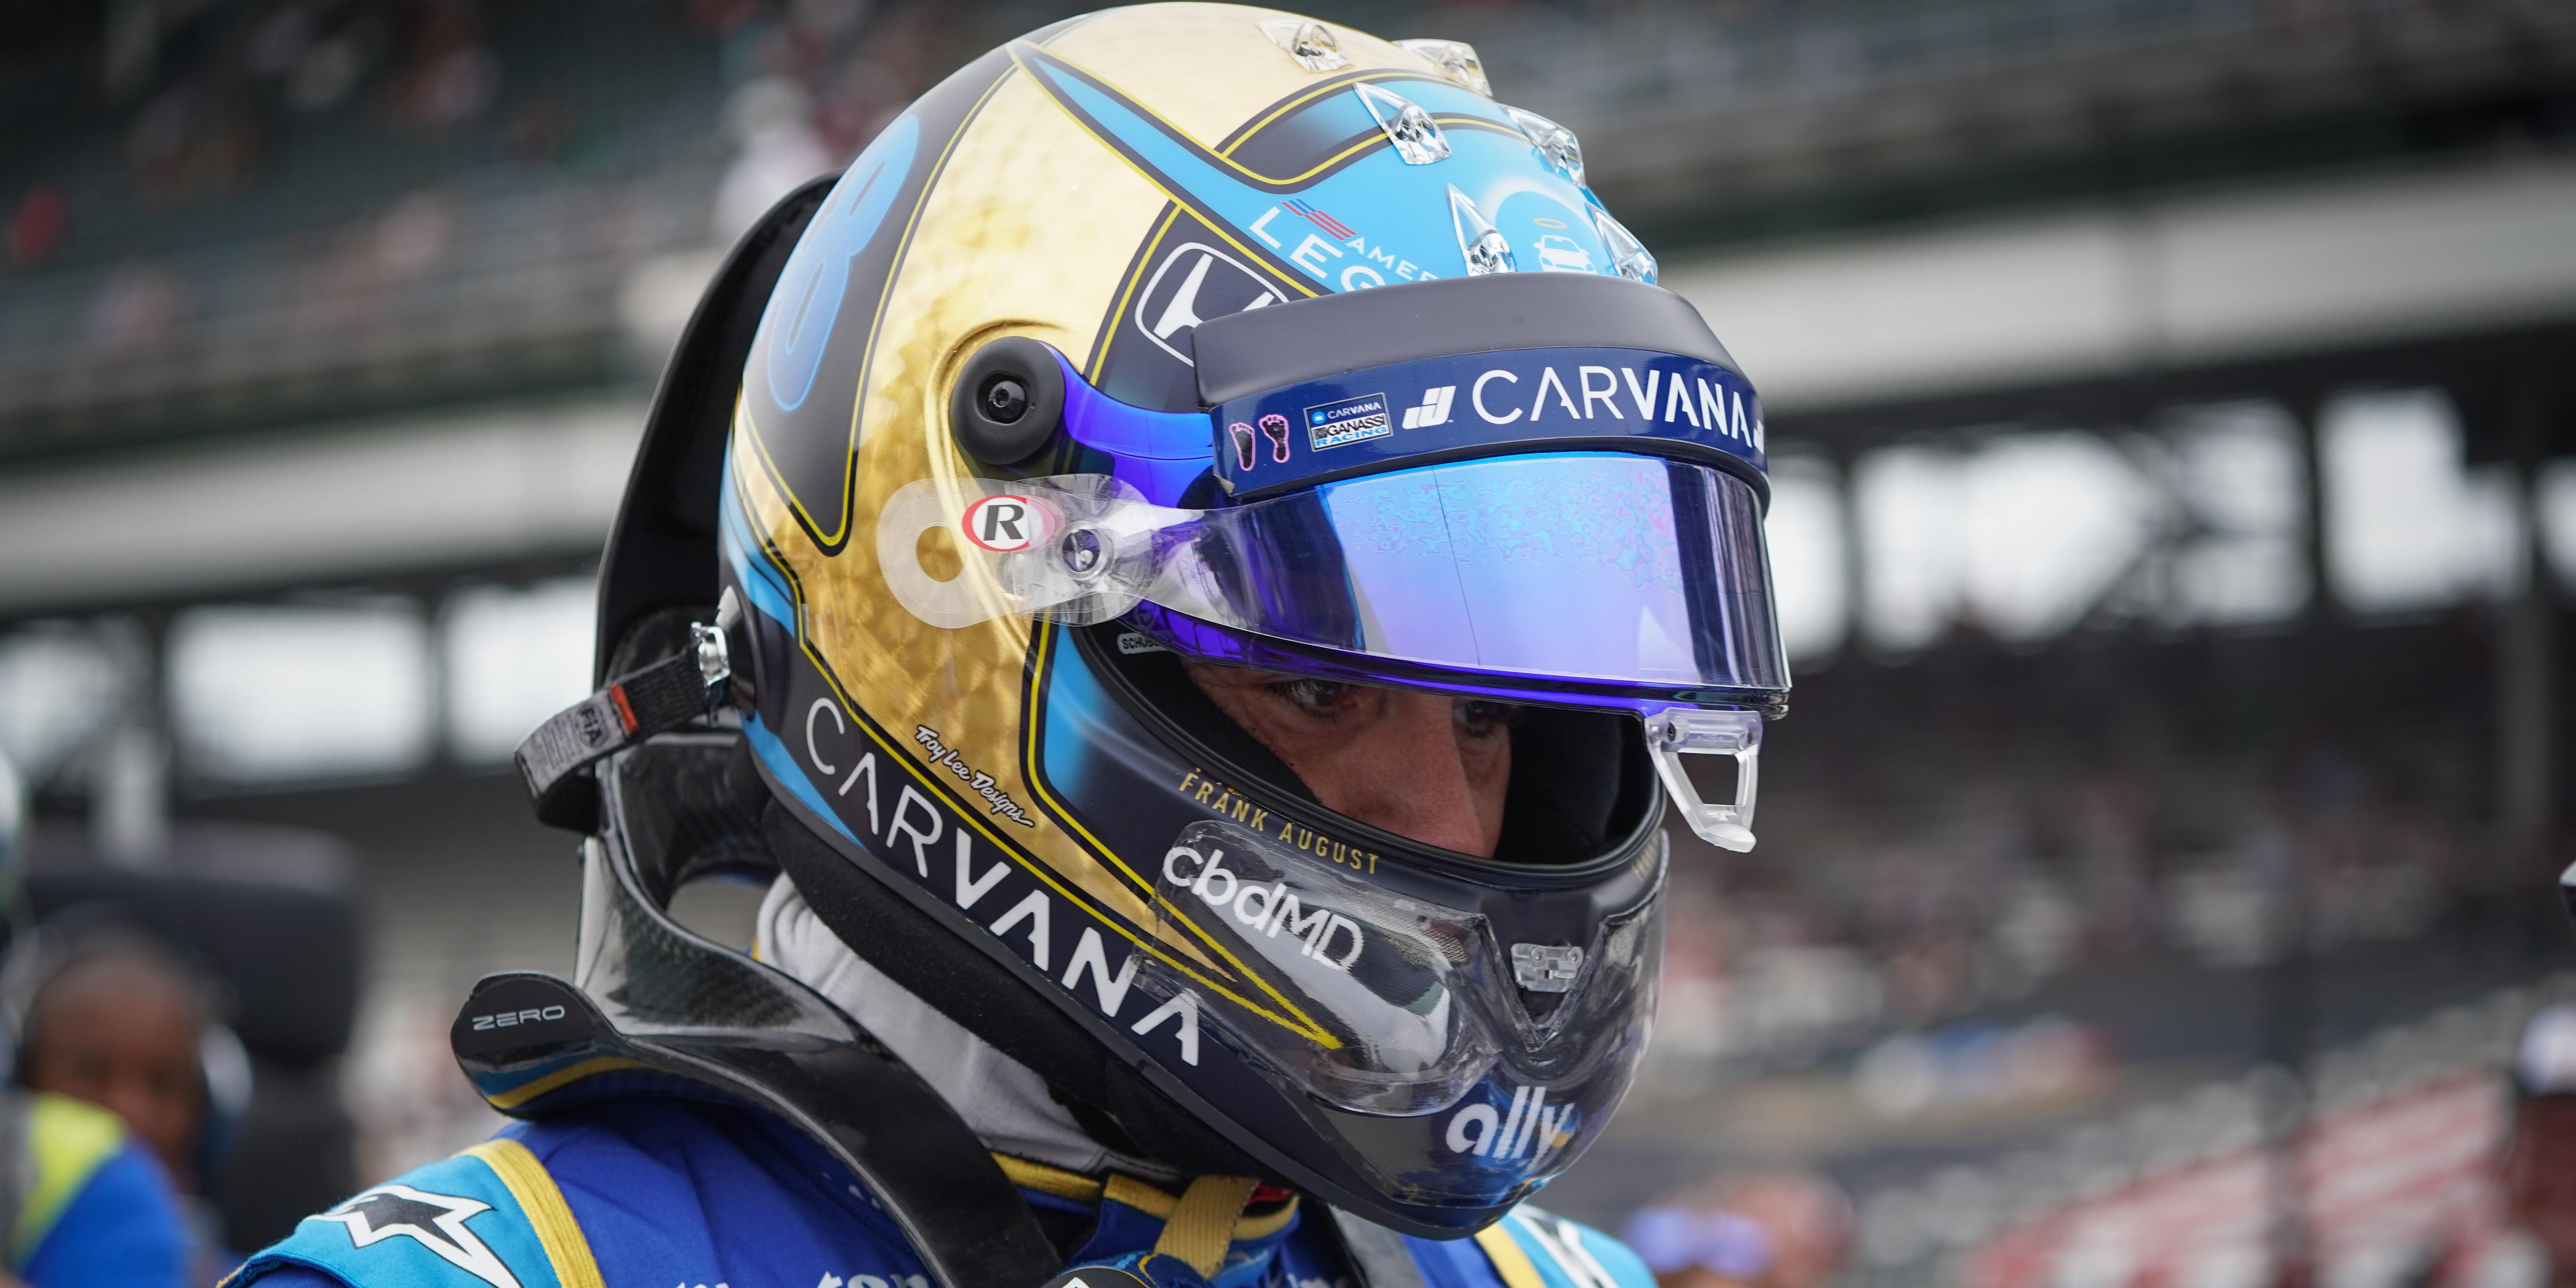 Jimmie Johnson Flirts with Disaster at Indy 500 Qualifying